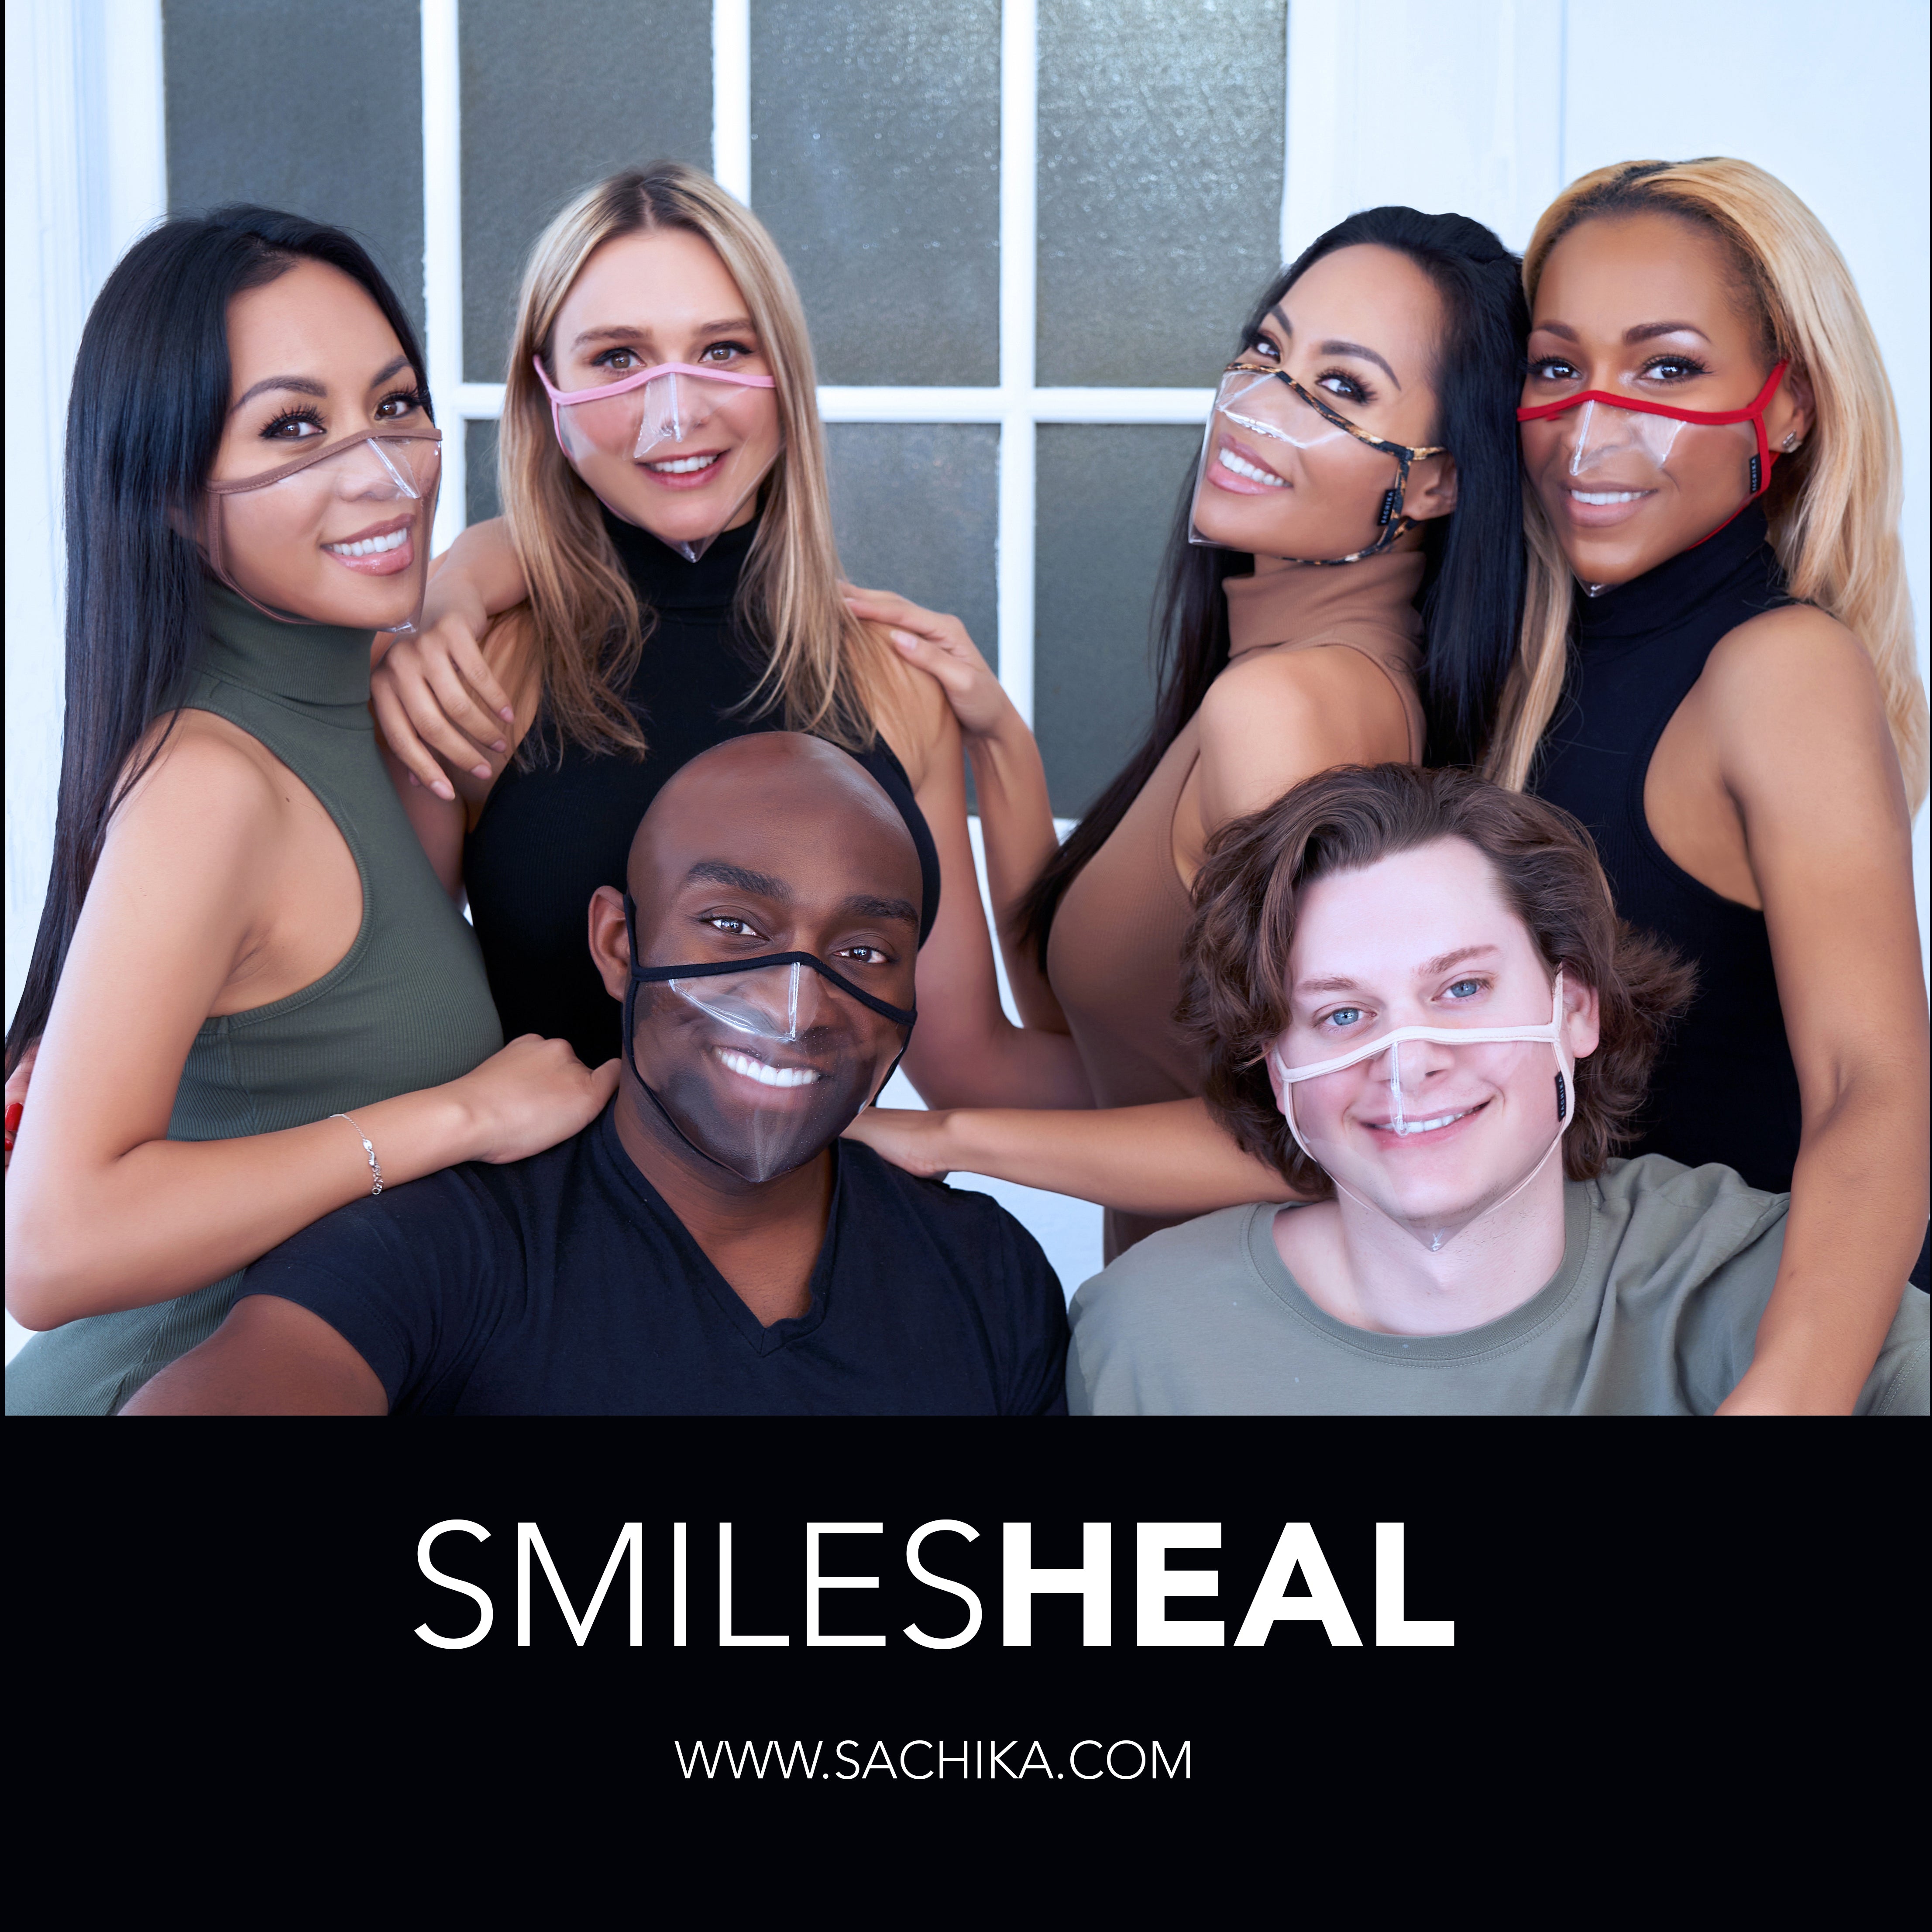 Reveal PINK Face Mask 100% Transparent Clear Mask by SACHIKA Made in the USA - SACHIKA® - Official Site 